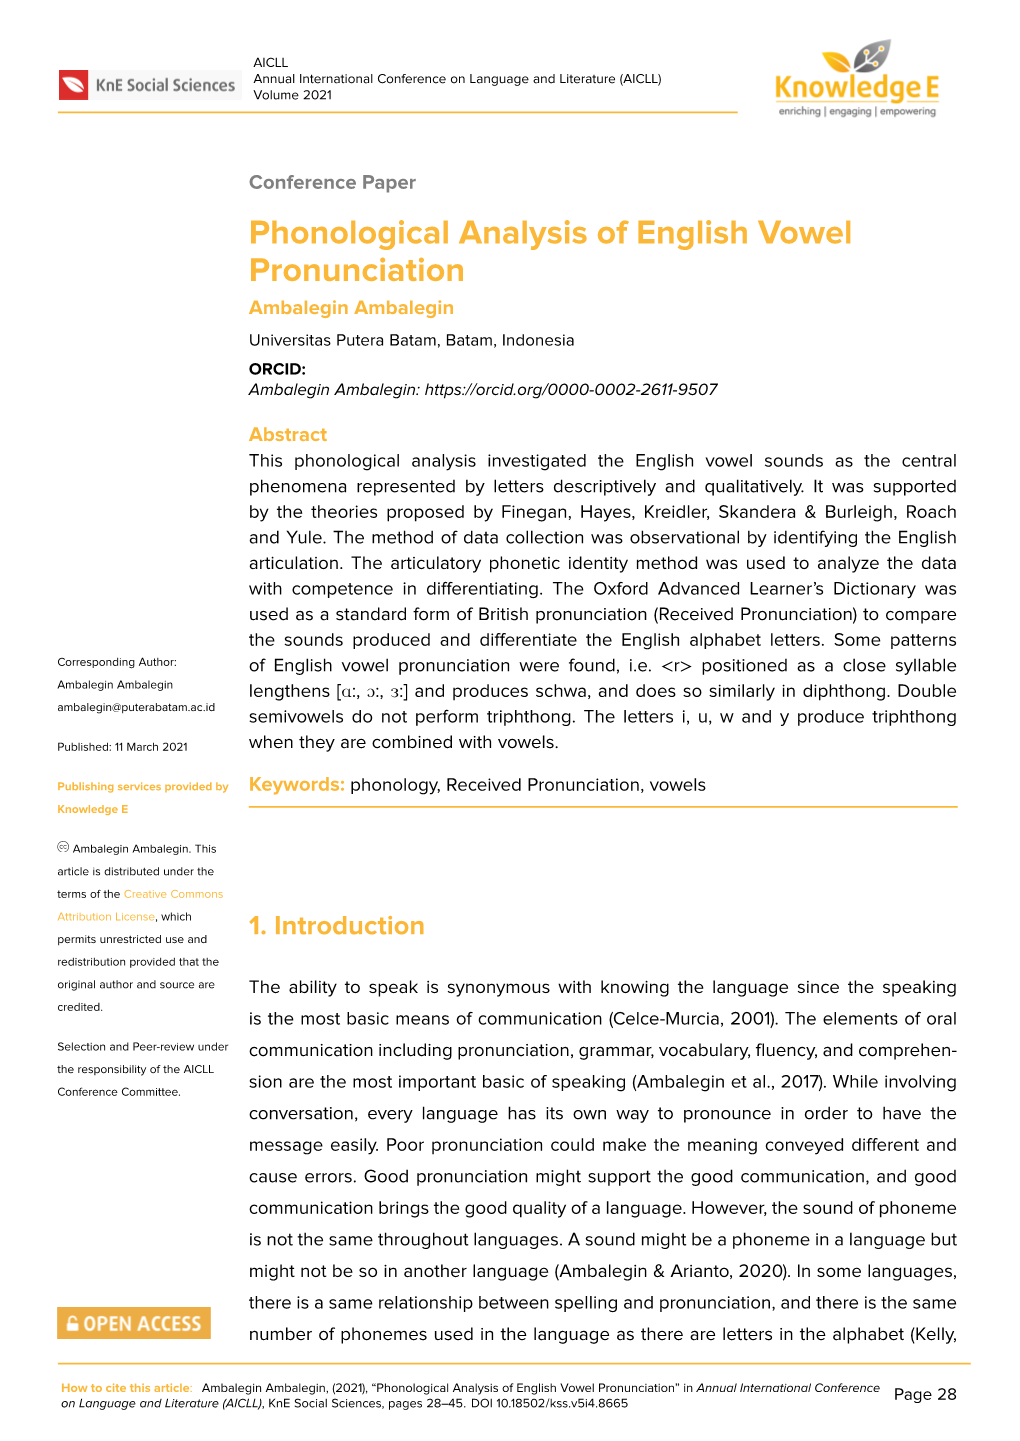 Phonological Analysis of English Vowel Pronunciation